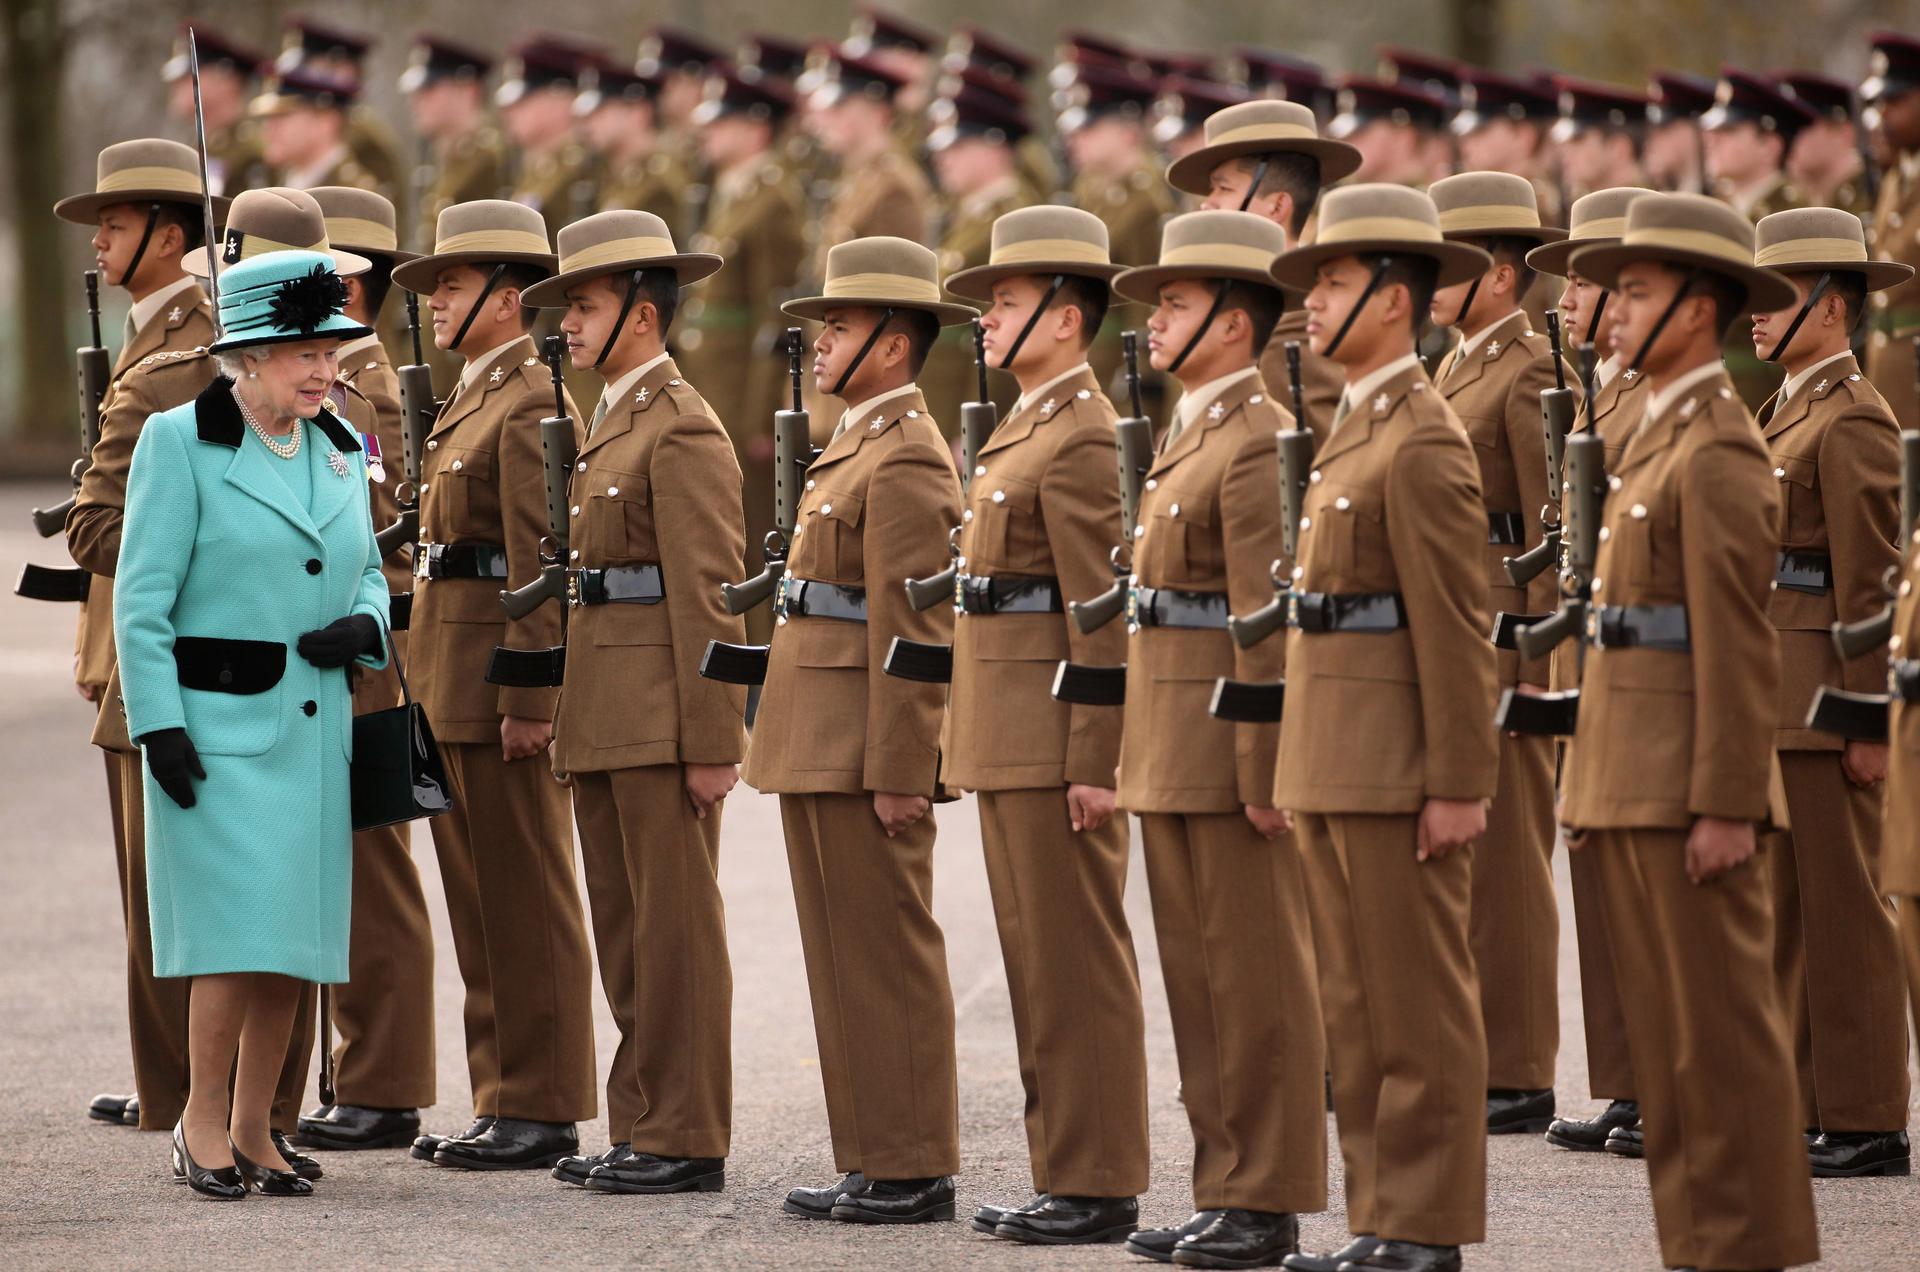 Britain's Queen Elizabeth inspects some of her Gurkha soldiers, in southern England, 2011.